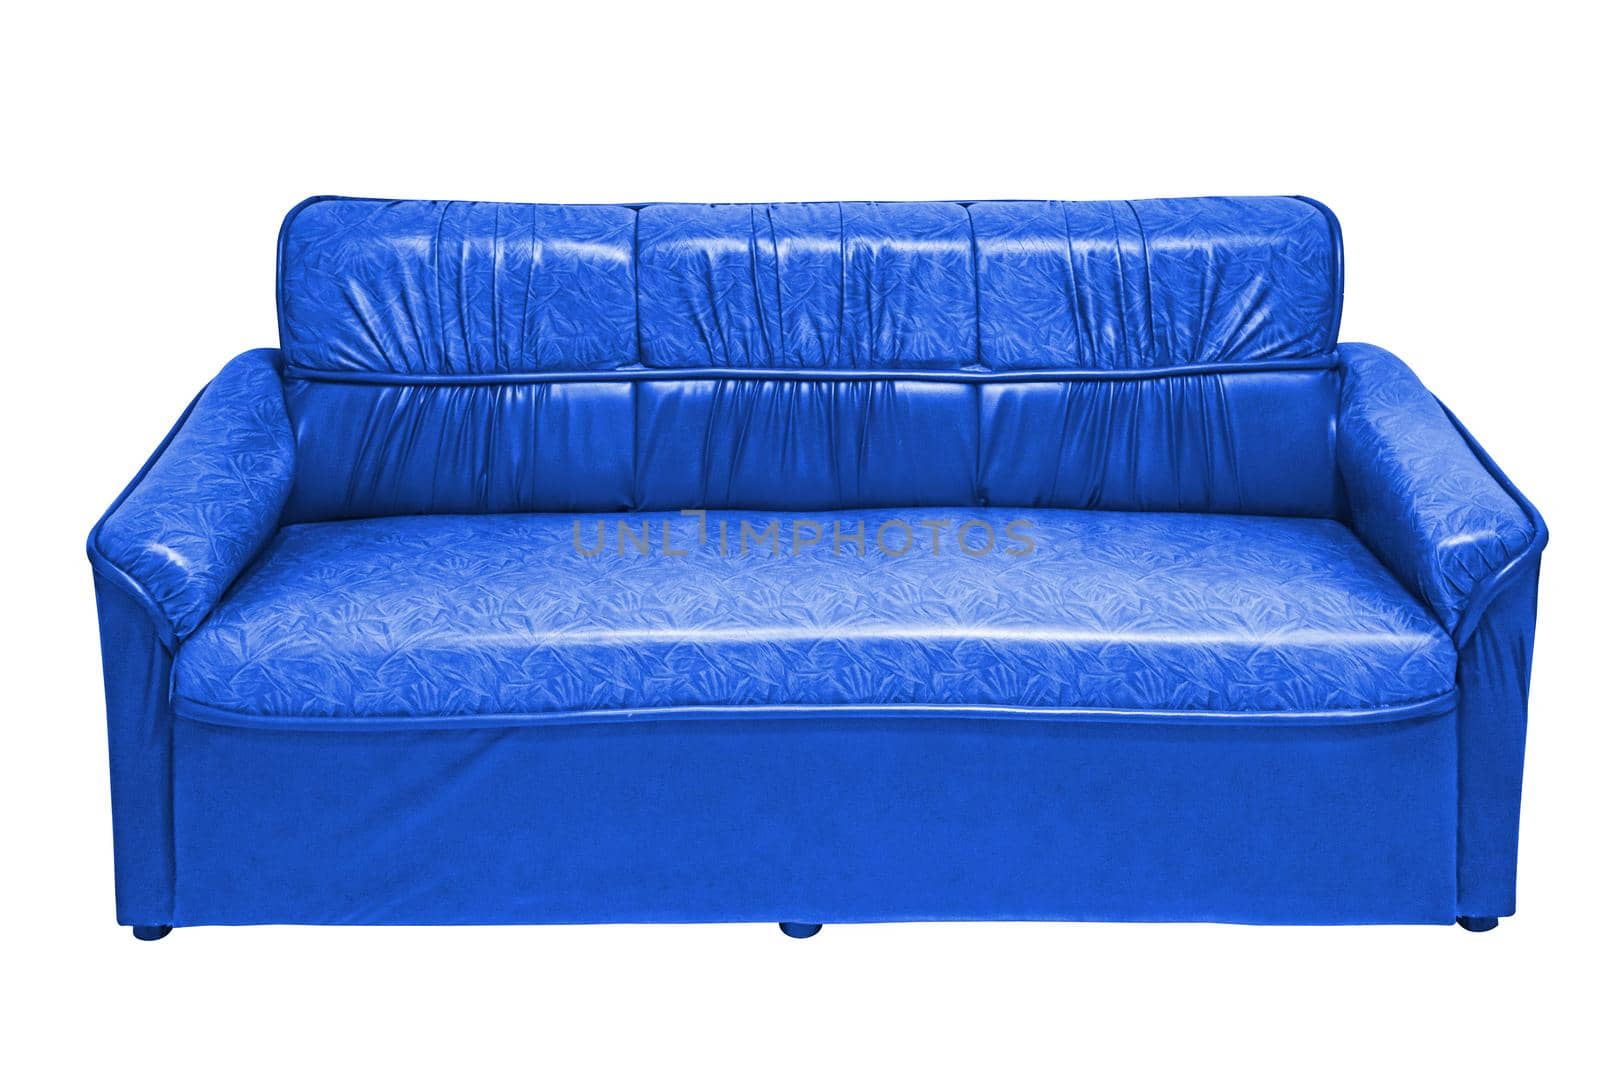 Vintage leather sofa isolated on white background, with clipping path.